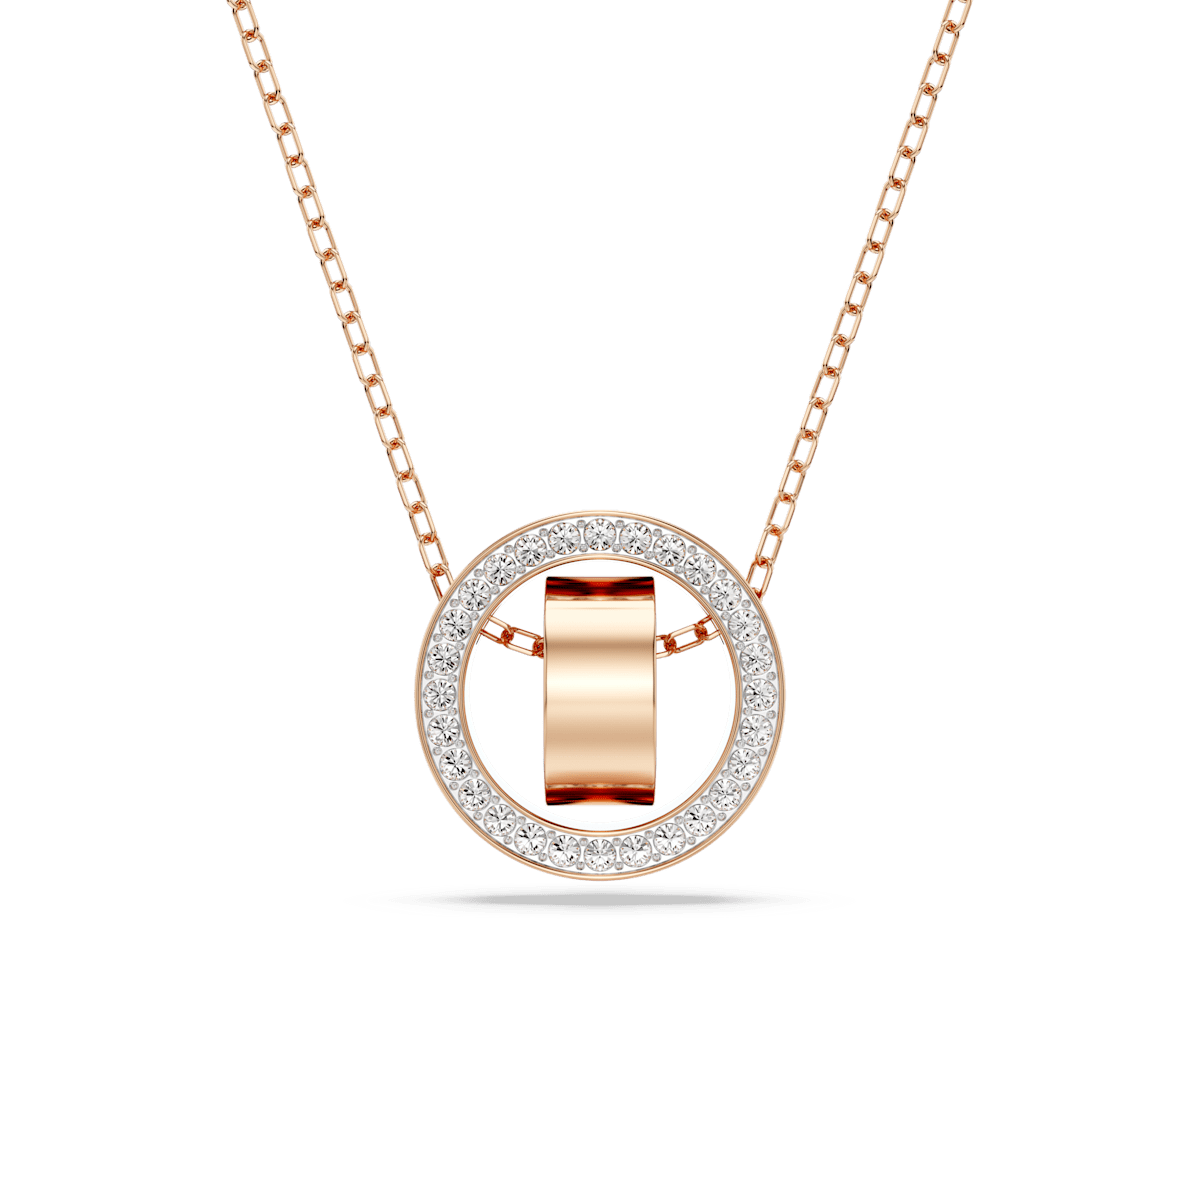 Hollow pendant, White, Rose gold-tone plated